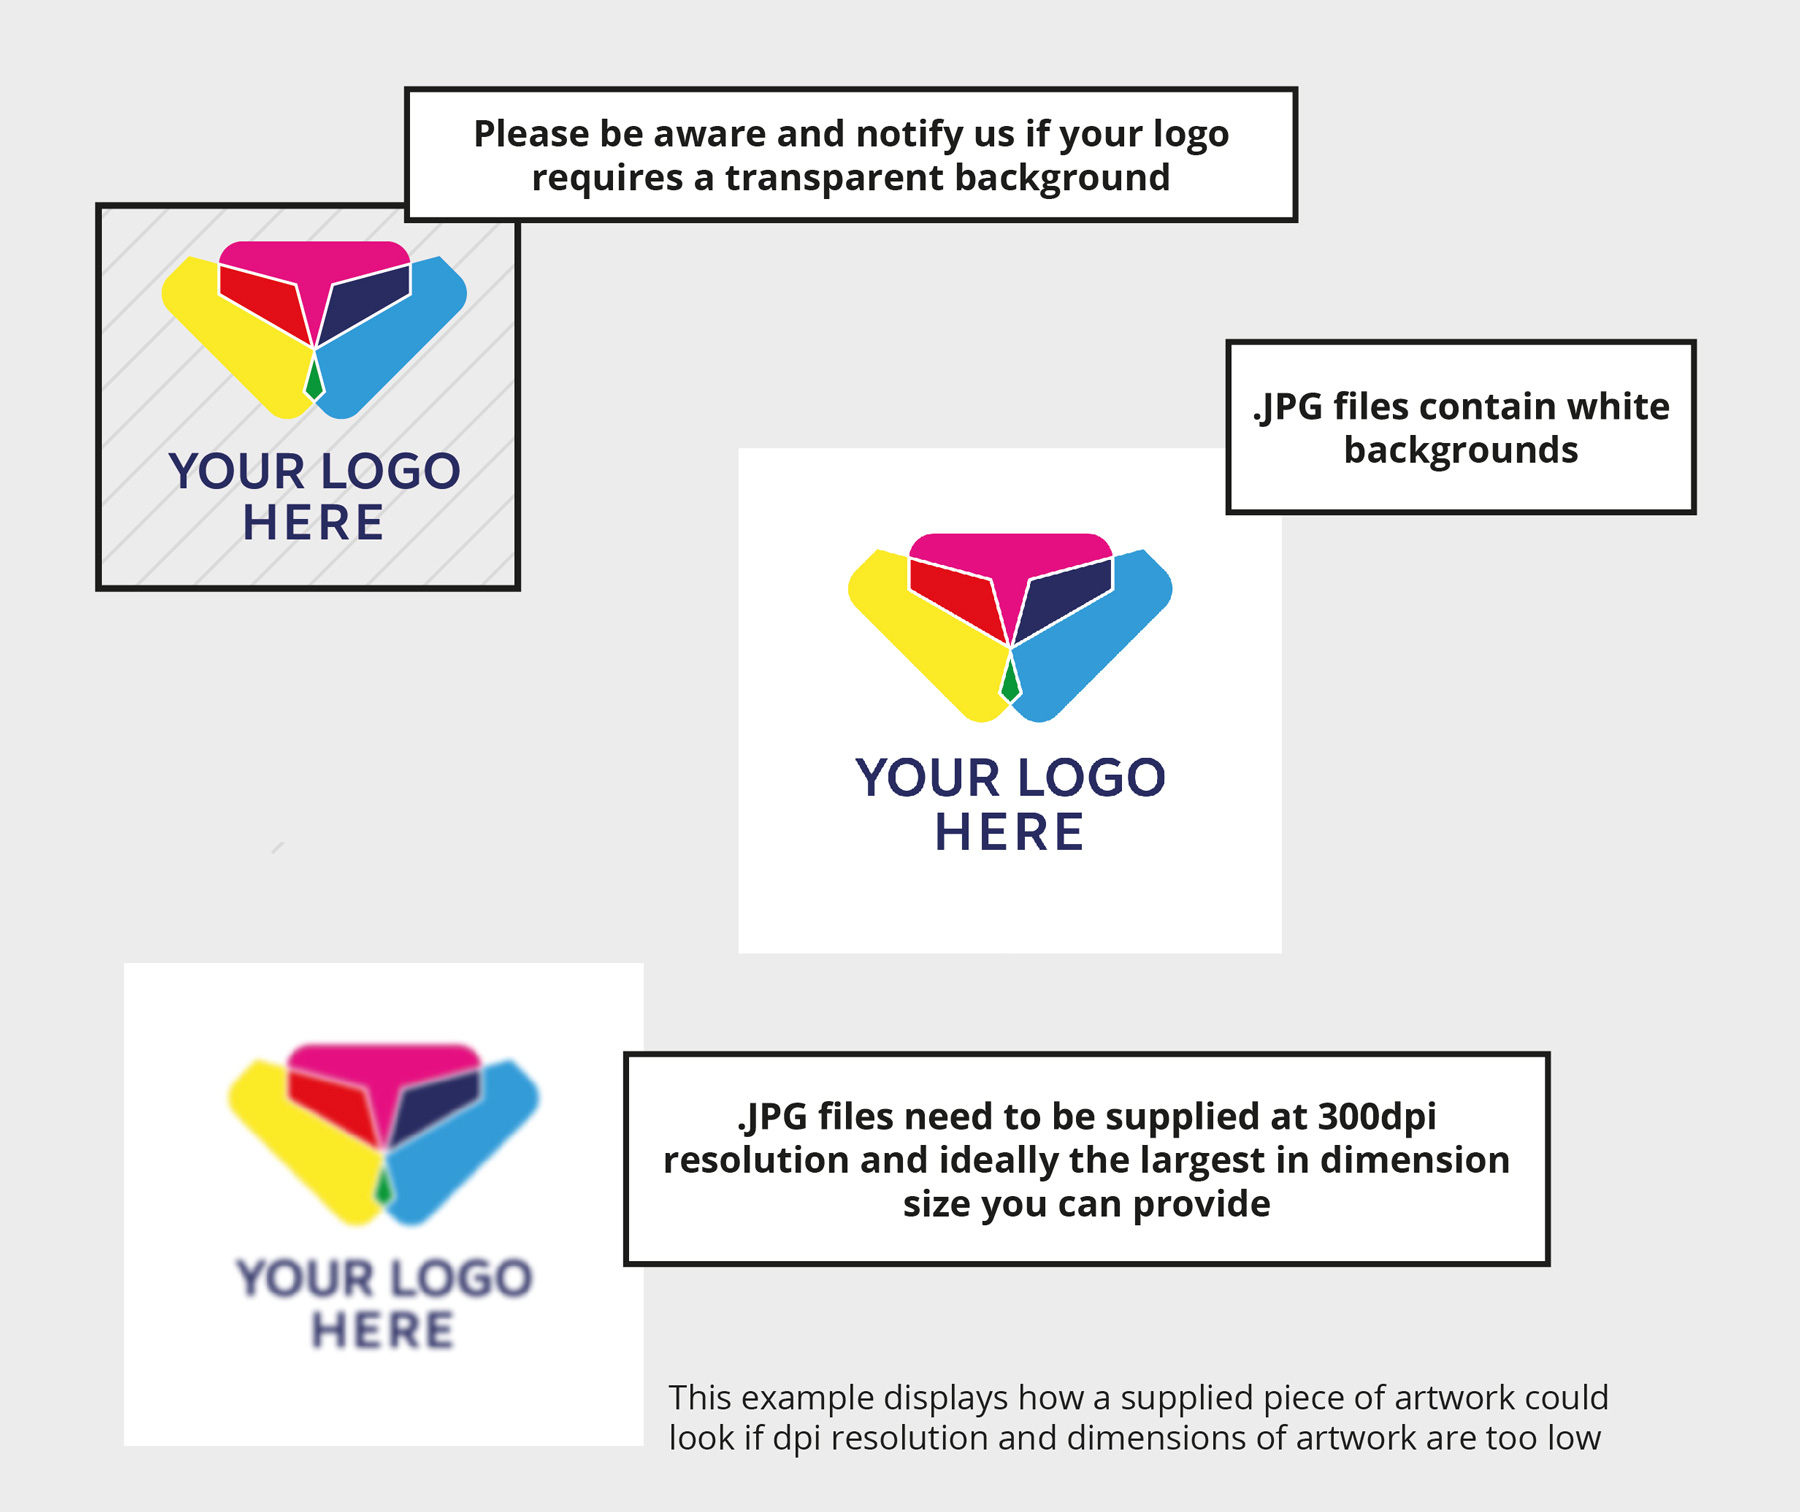 Let Us Know If You Want Your Logo To Be Transparent; JPG Images Have A White Background.